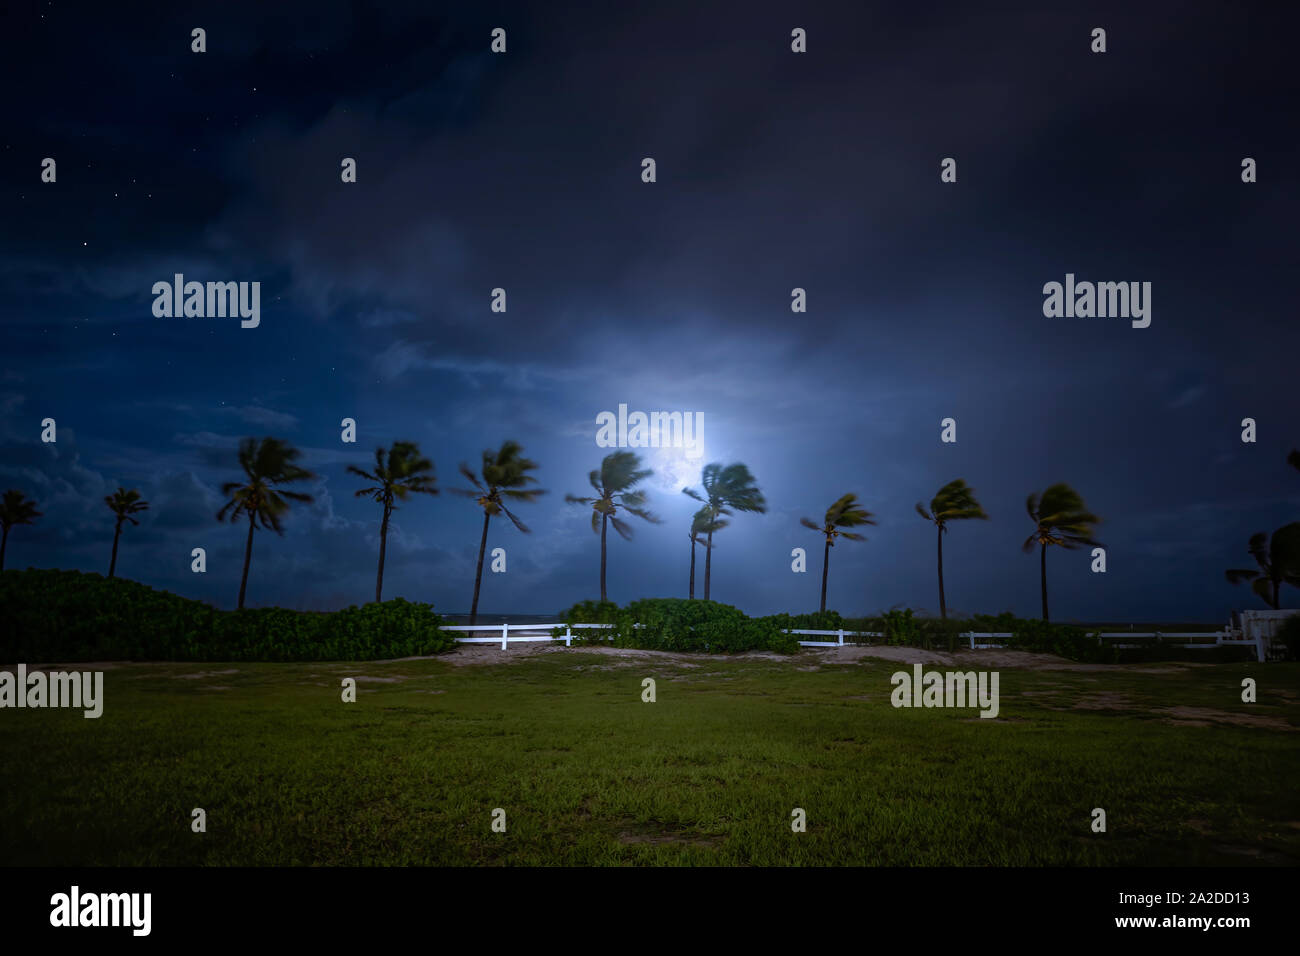 A full moon rises above a row of Coconut Palm Trees at Fort Lauderdale Beach, FL. This is one of few relatively secluded areas near the beach. Stock Photo